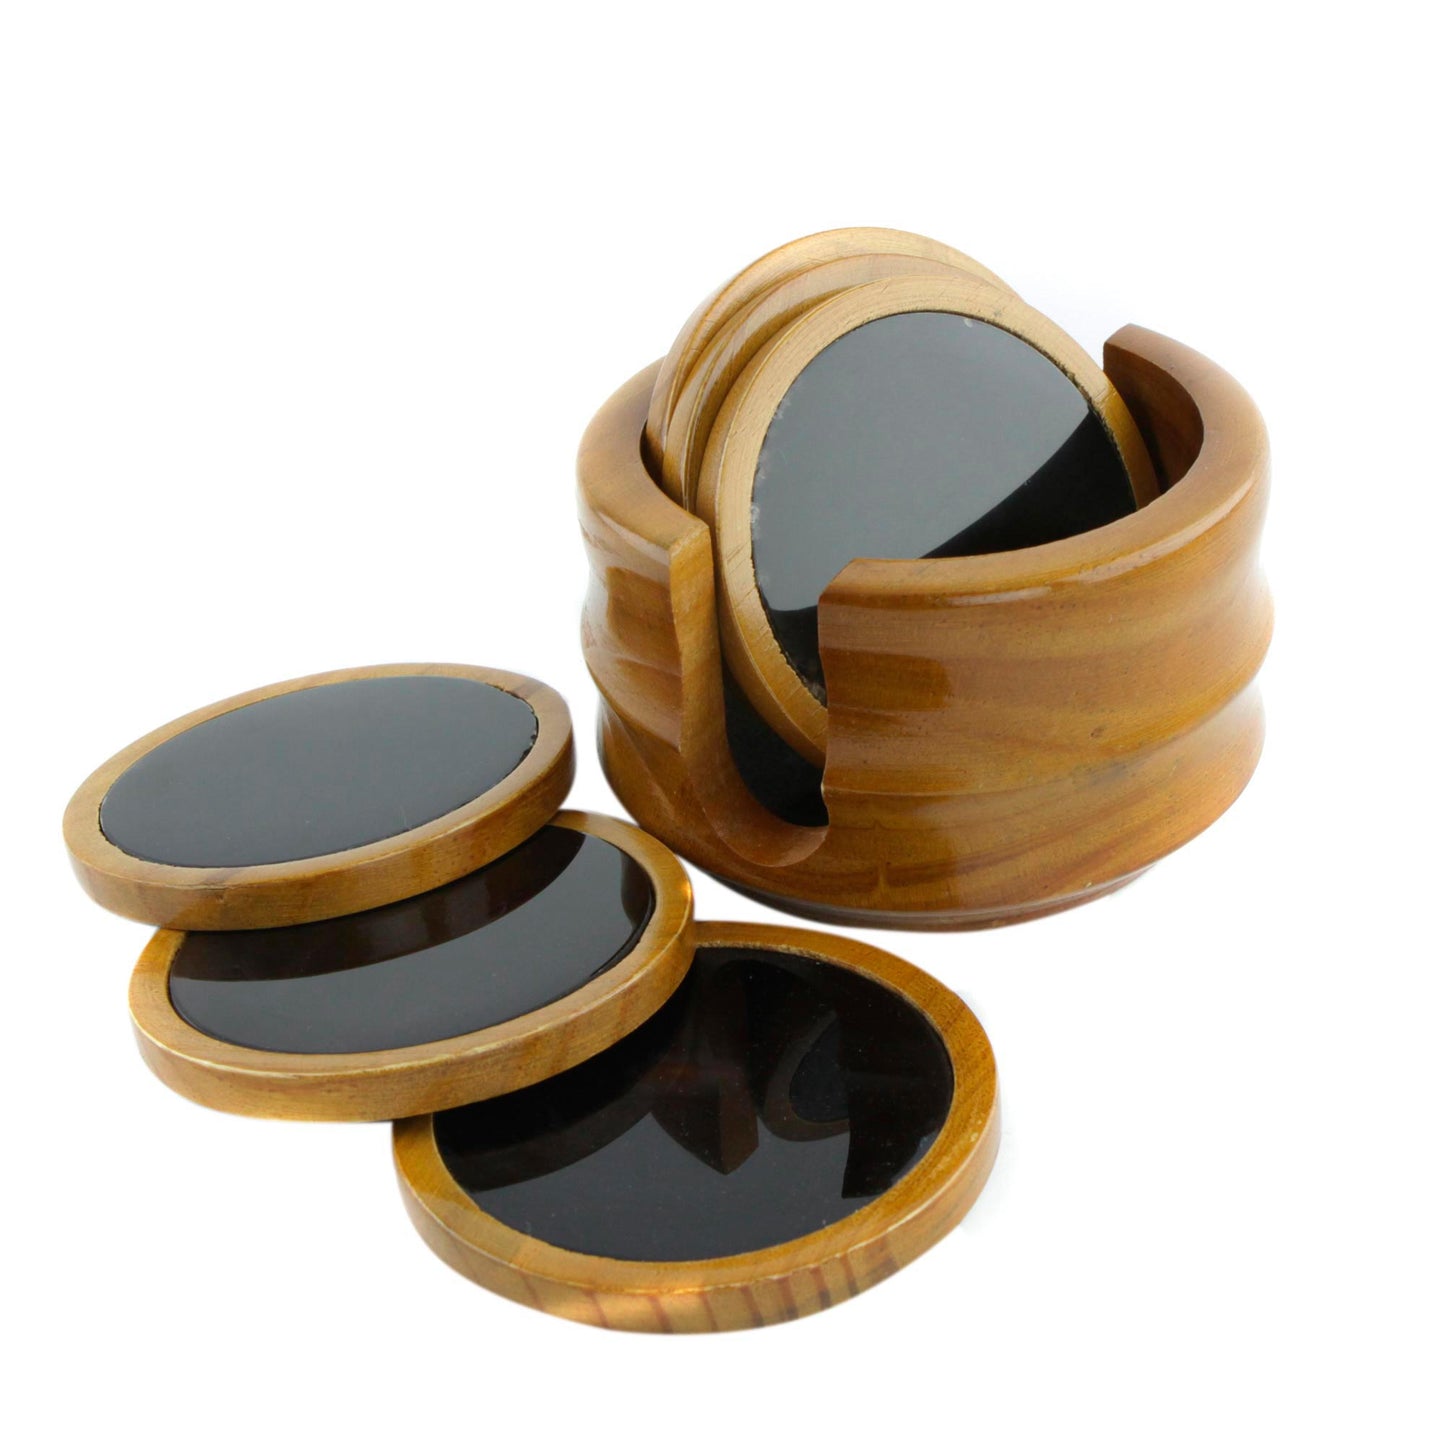 Nocturnal Wisdom Set of 6 Black Agate and Cedar Wood Coasters with Stand